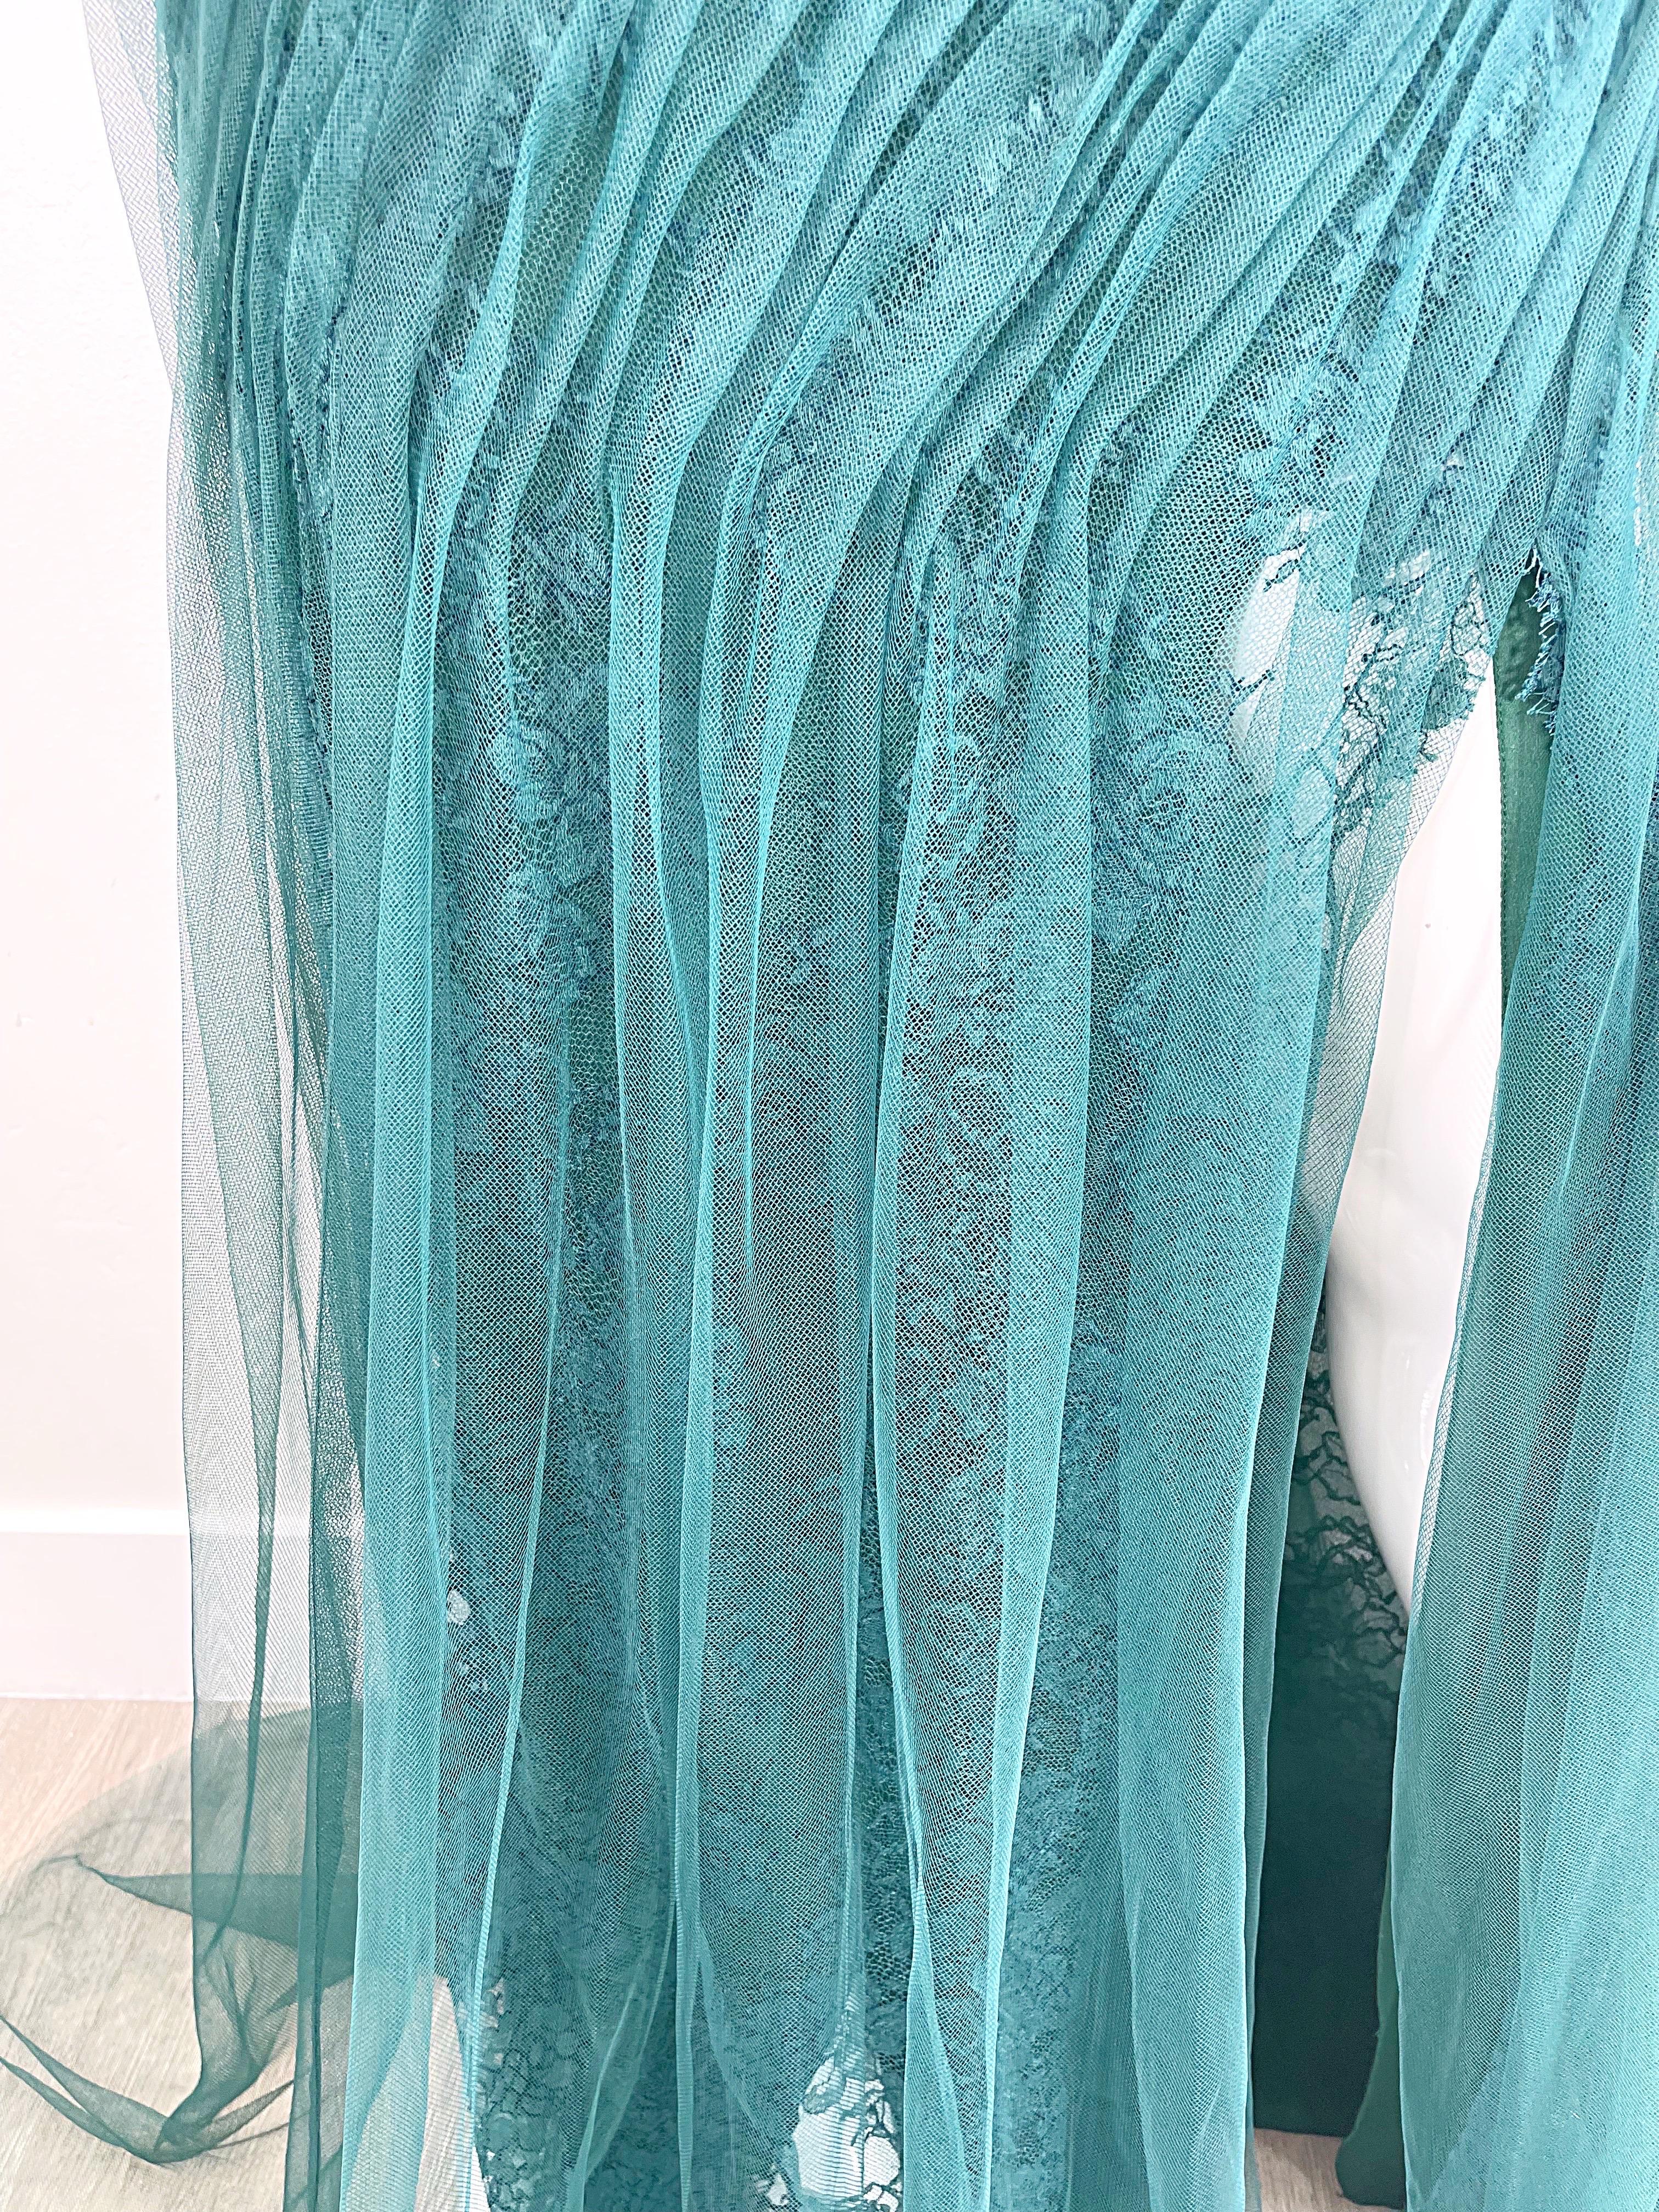 NWT Monique Lhuillier Runway Spring 2013 Size 4 Emerald Green Lace Gown Dress For Sale 7